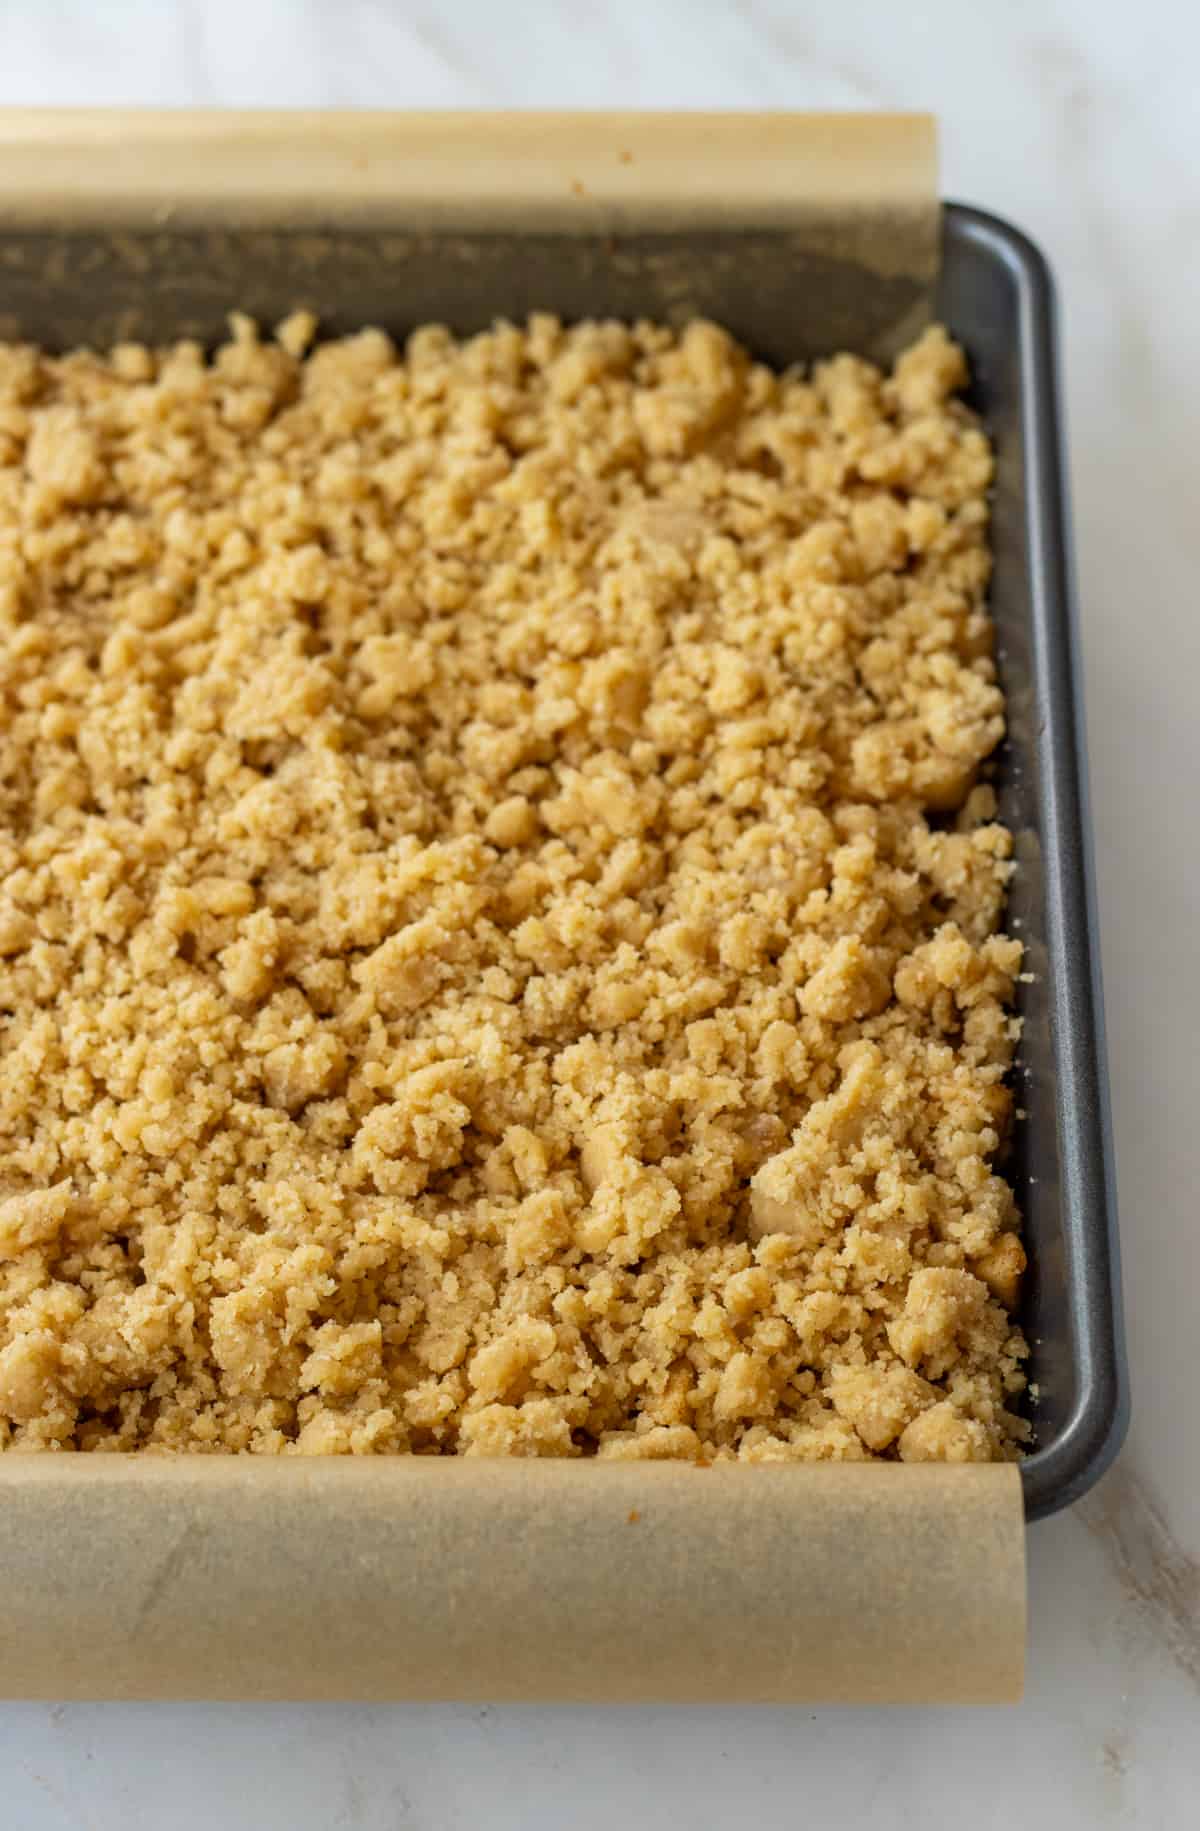 Unbaked apple bars in a parchment lined baking dish.